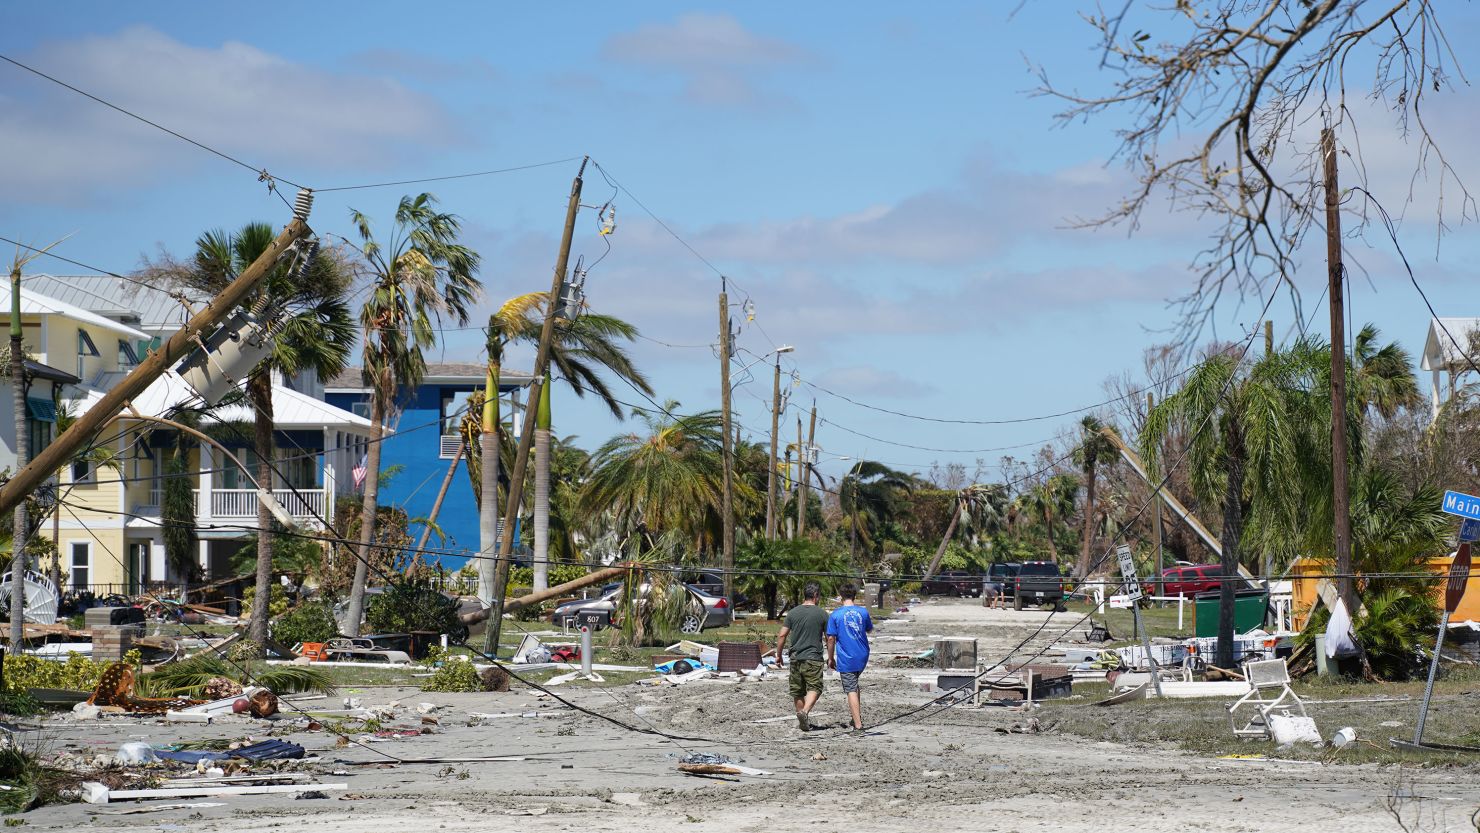 A neighborhood in Fort Myers, Florida, in September 2022 showing the damage left by Hurricane Ian's high storm surge and devastating winds.